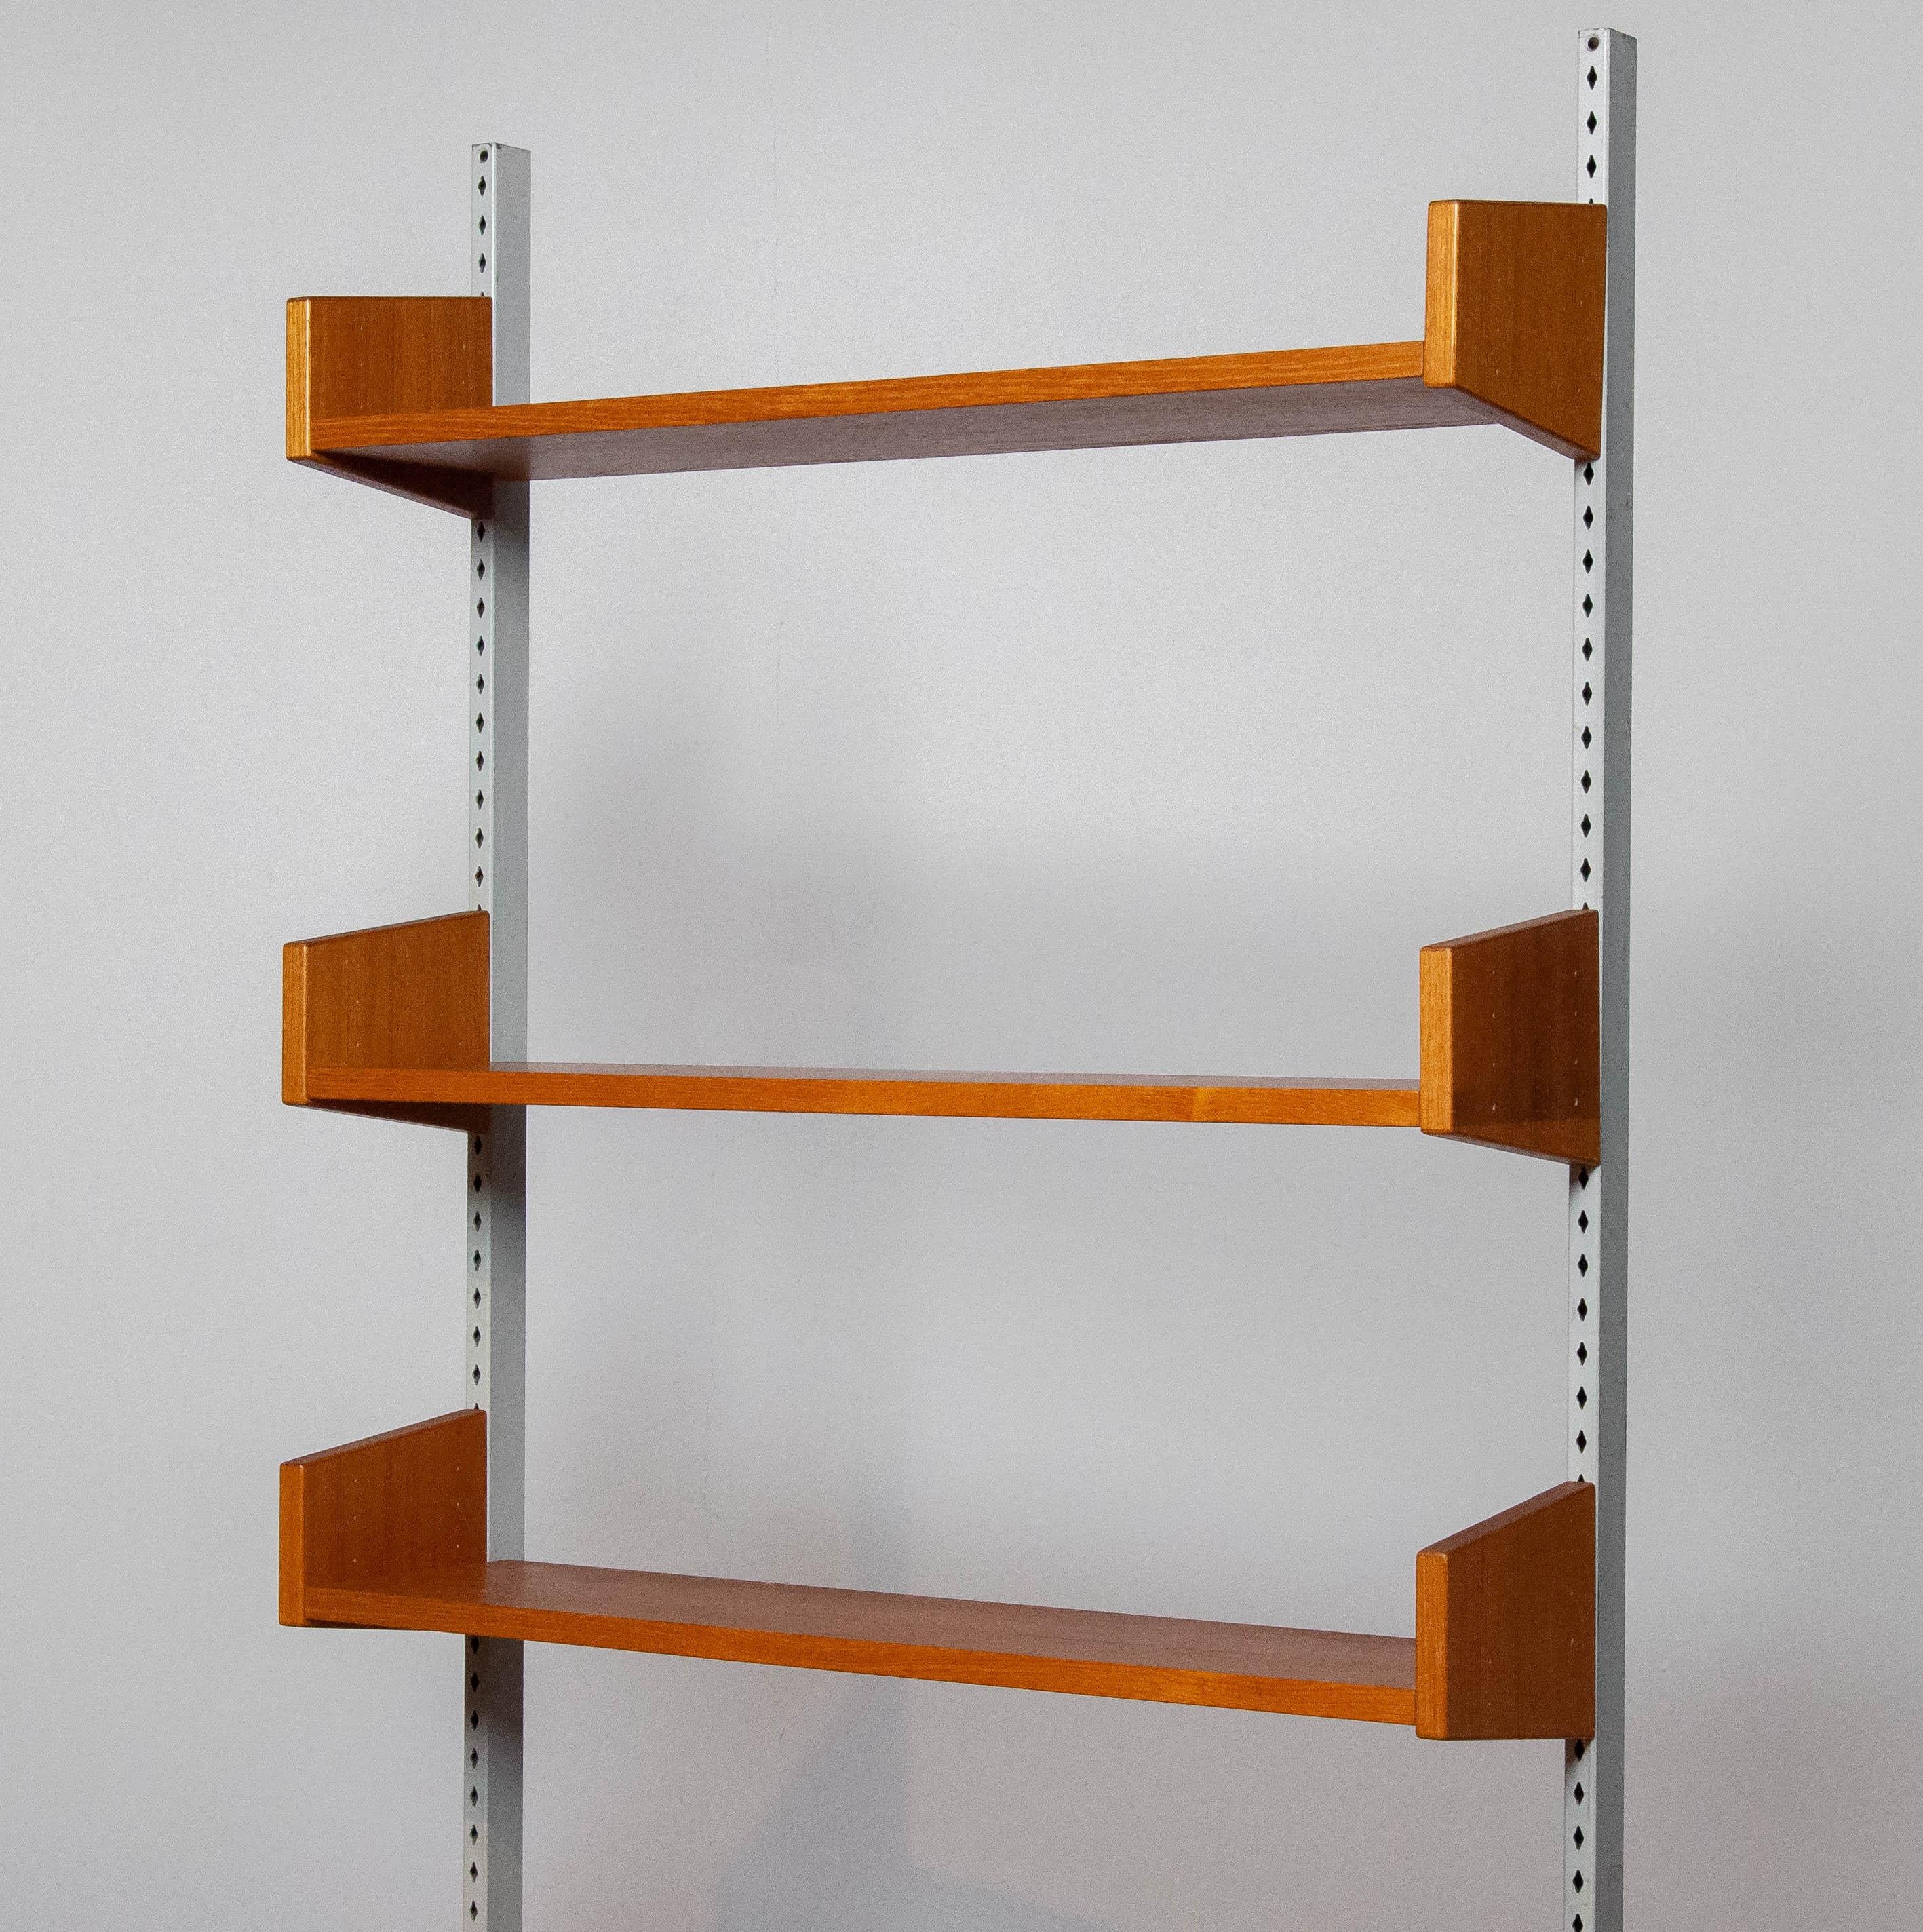 Mid-Century Modern 1950's Teak Shelf System / Bookcase in Teak with Steel Bars by Harald Lundqvist For Sale